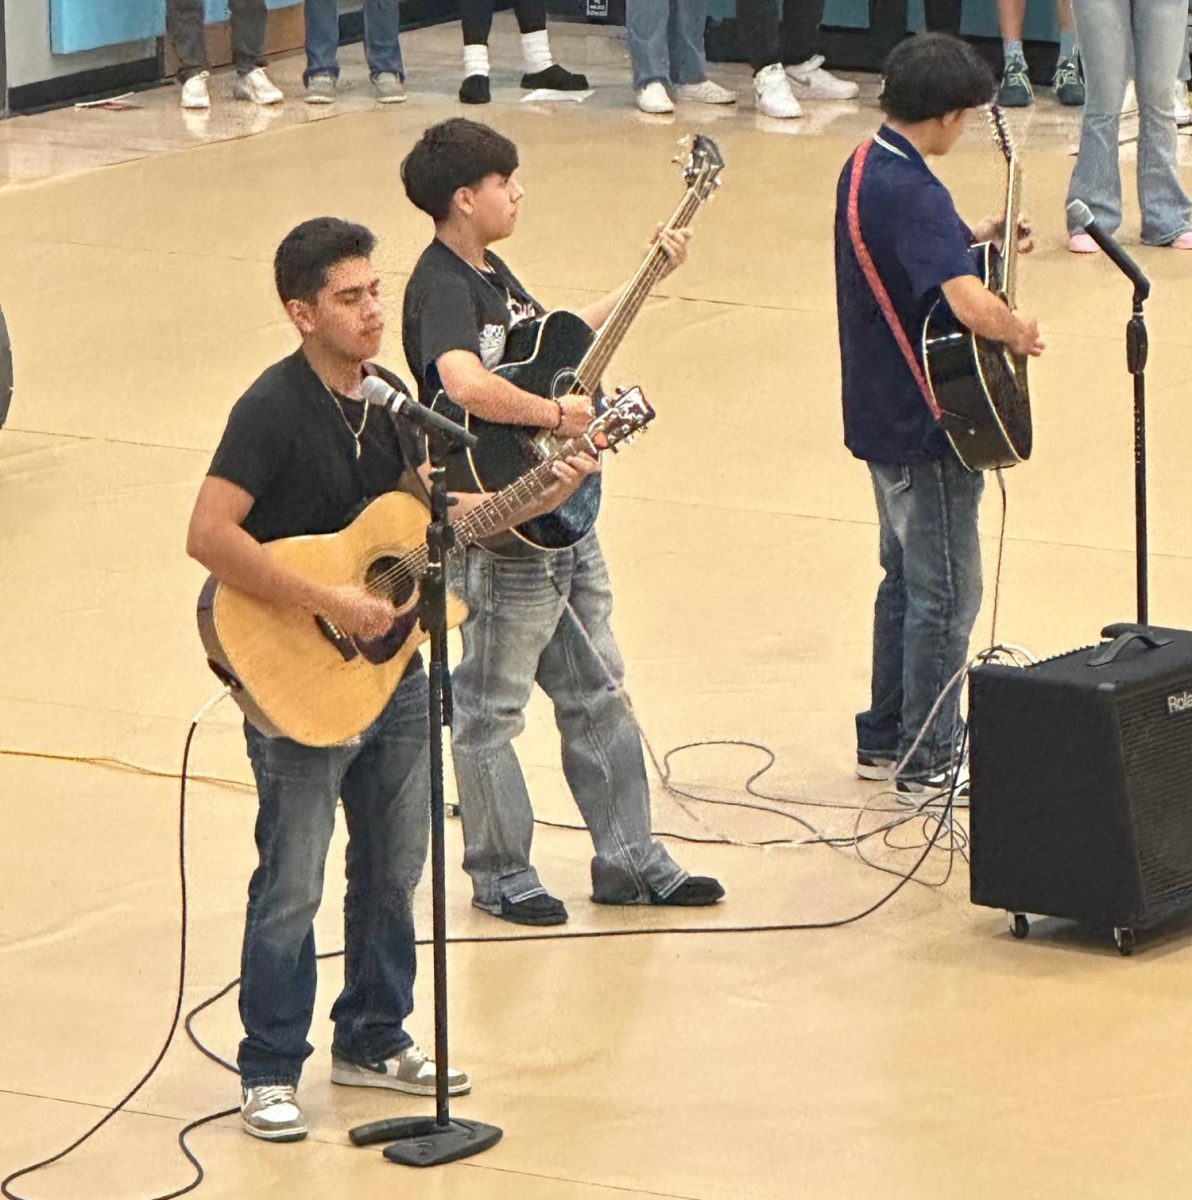 Greeley West students Edgar Garcia, Leo Soto, and Kevin Hererra play a song in front of the assembly last week.